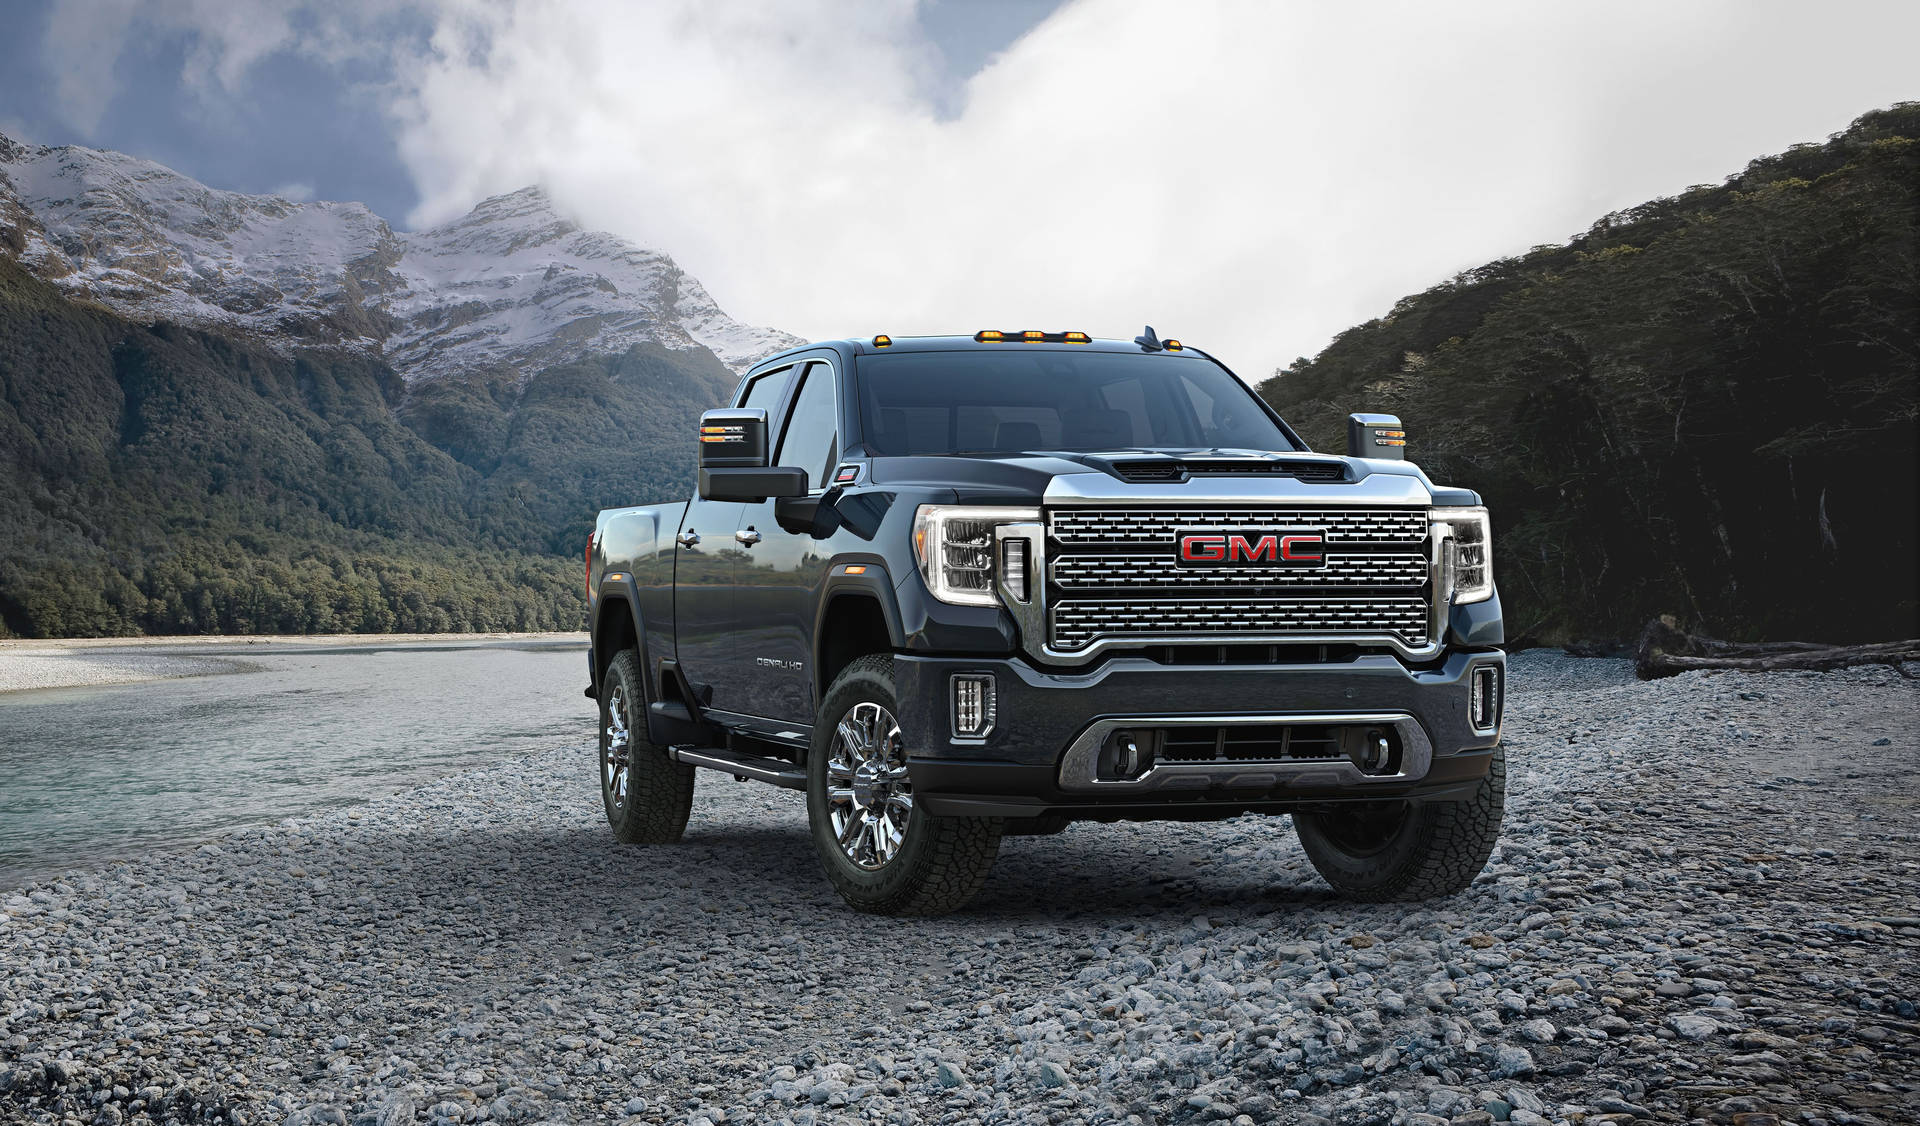 Rugged Power Meets Gracious Style - Gmc Pickup Truck Background